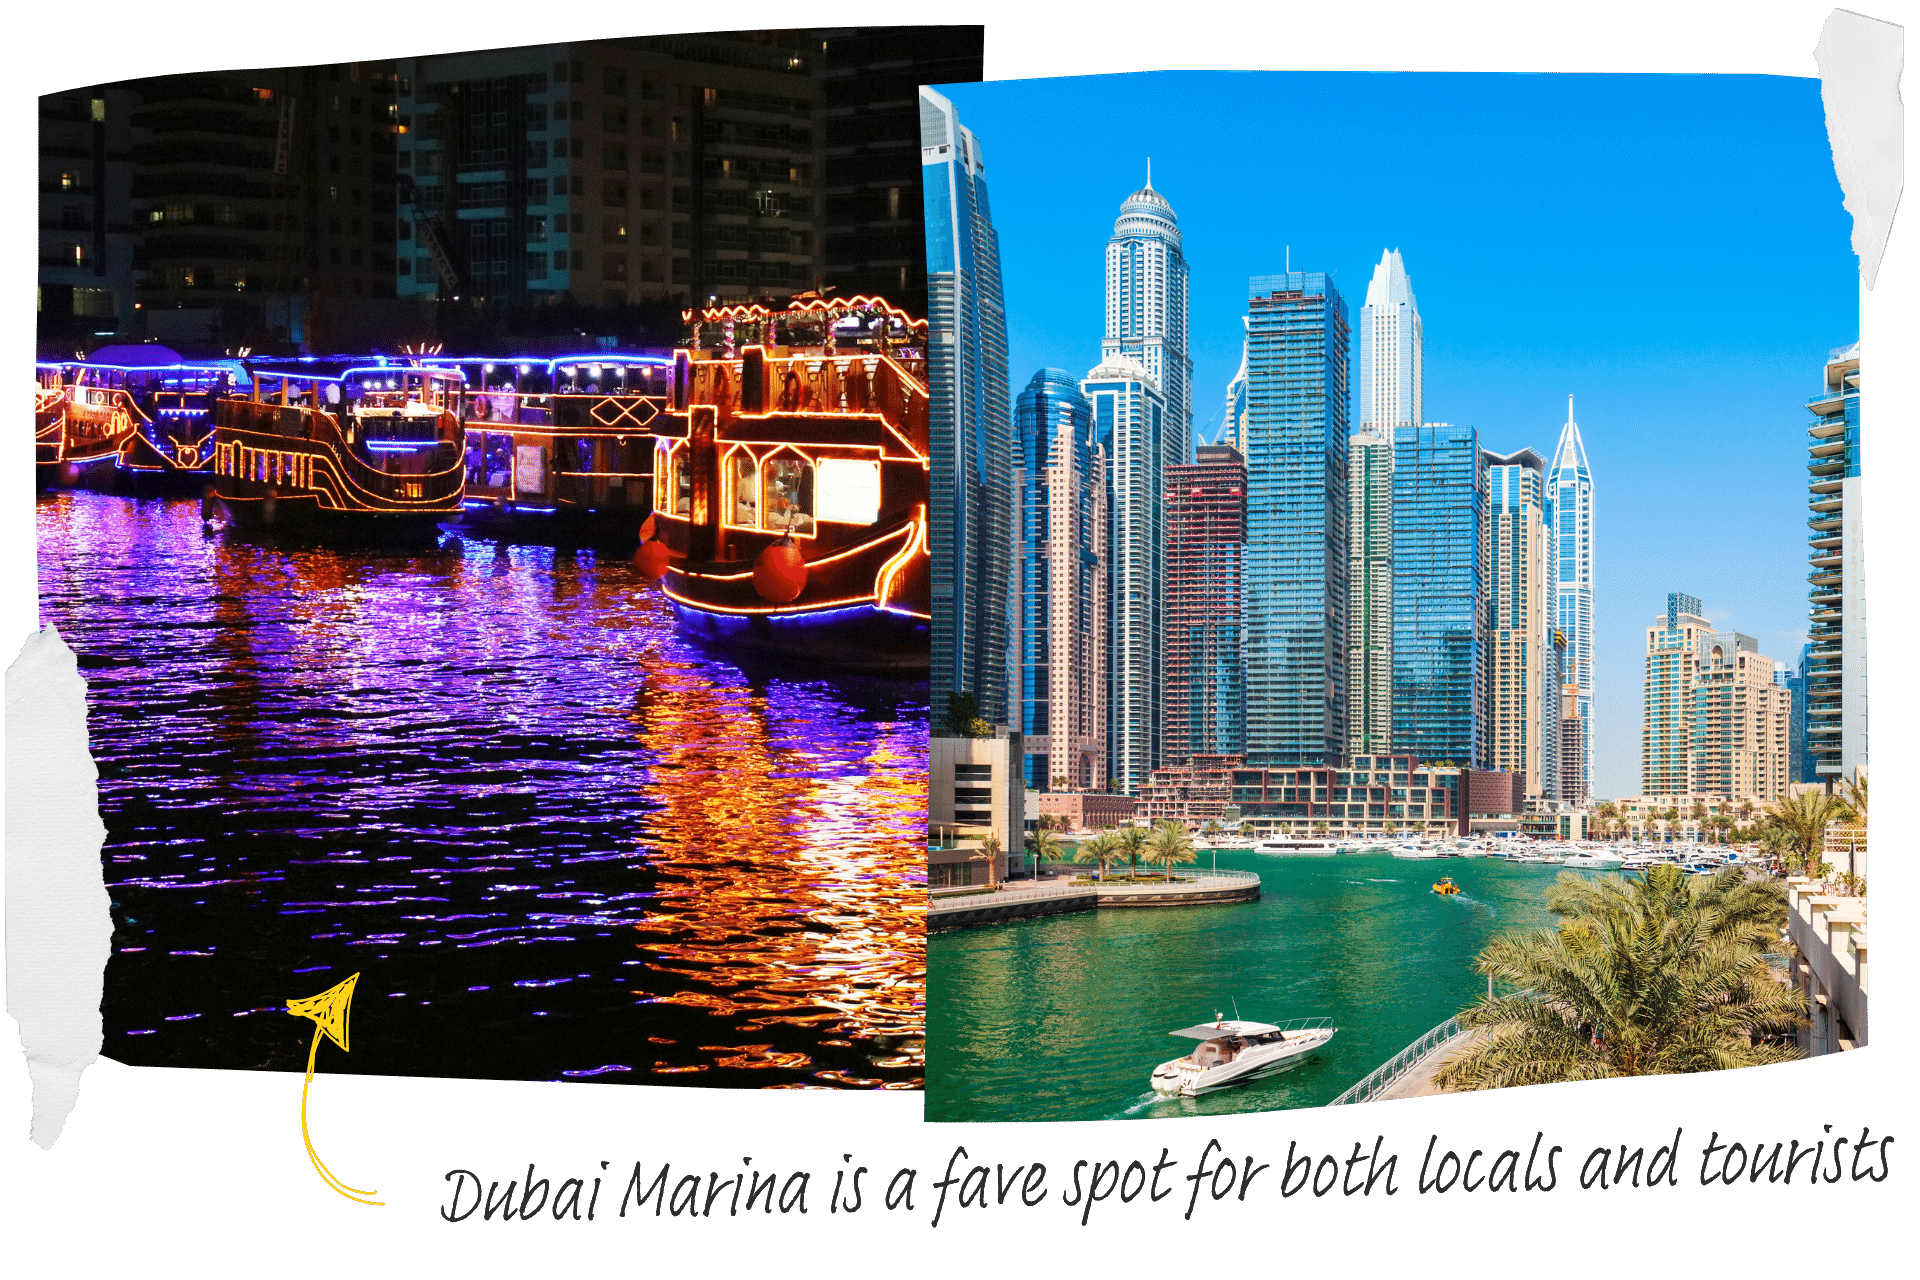 The Marina is a must-visit when it comes to Dubai for first timers. Image shows two pictures of Dubai taped together, one showing the marina at night with boats covered in bright, colourful lights, and one by day with skyscrapers looming over beneath a blue sky.